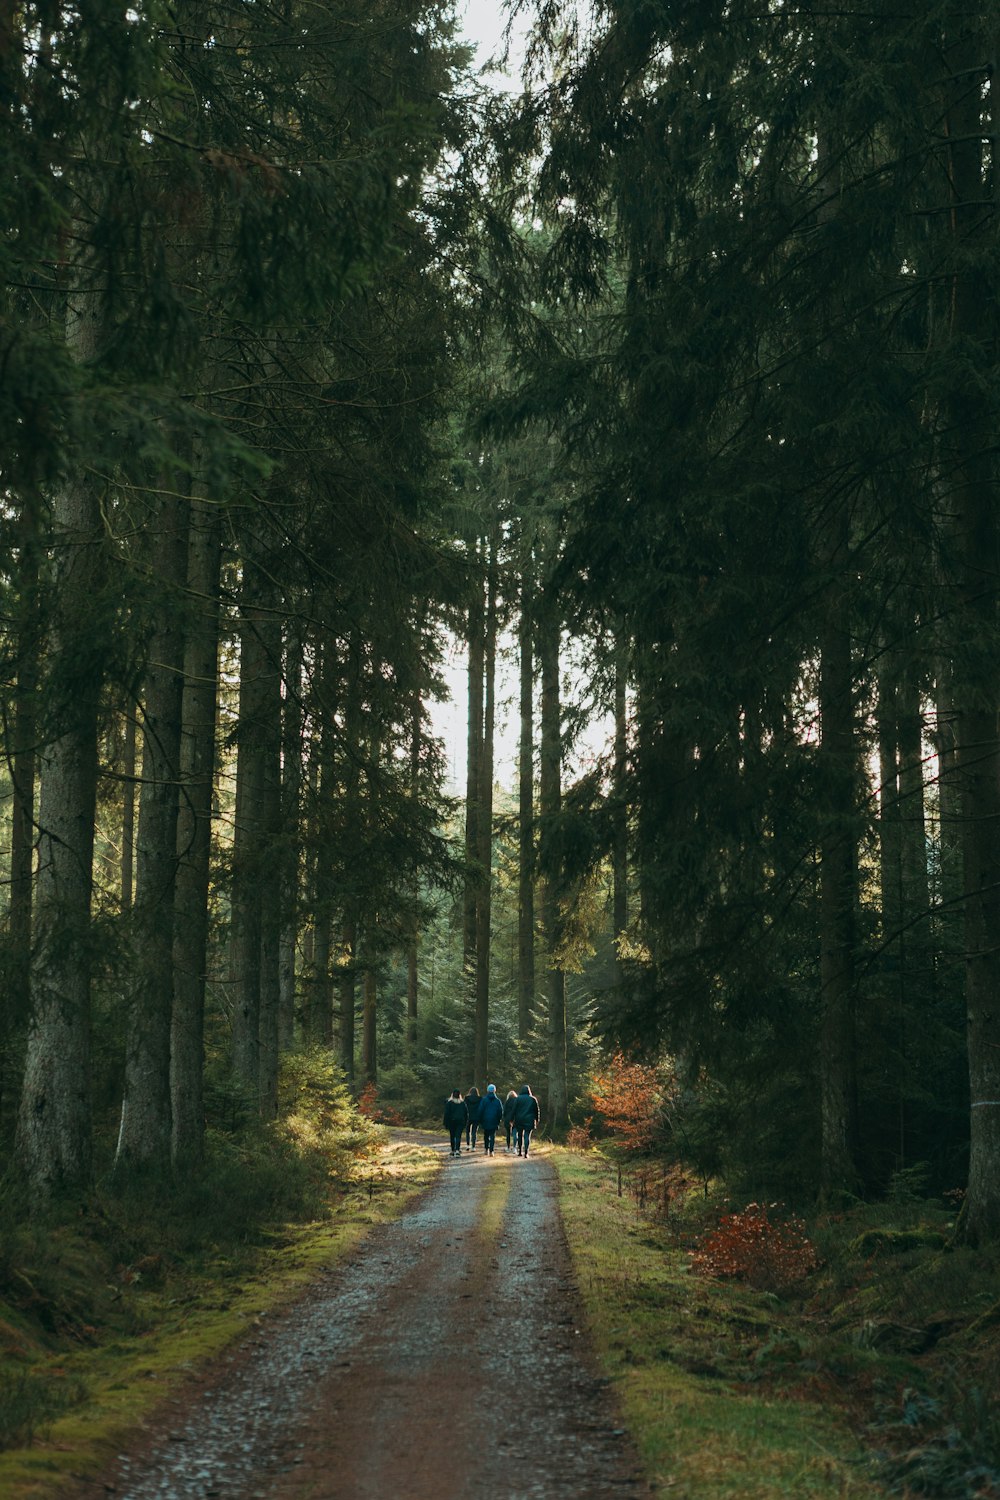 a group of people walking down a dirt road in the woods